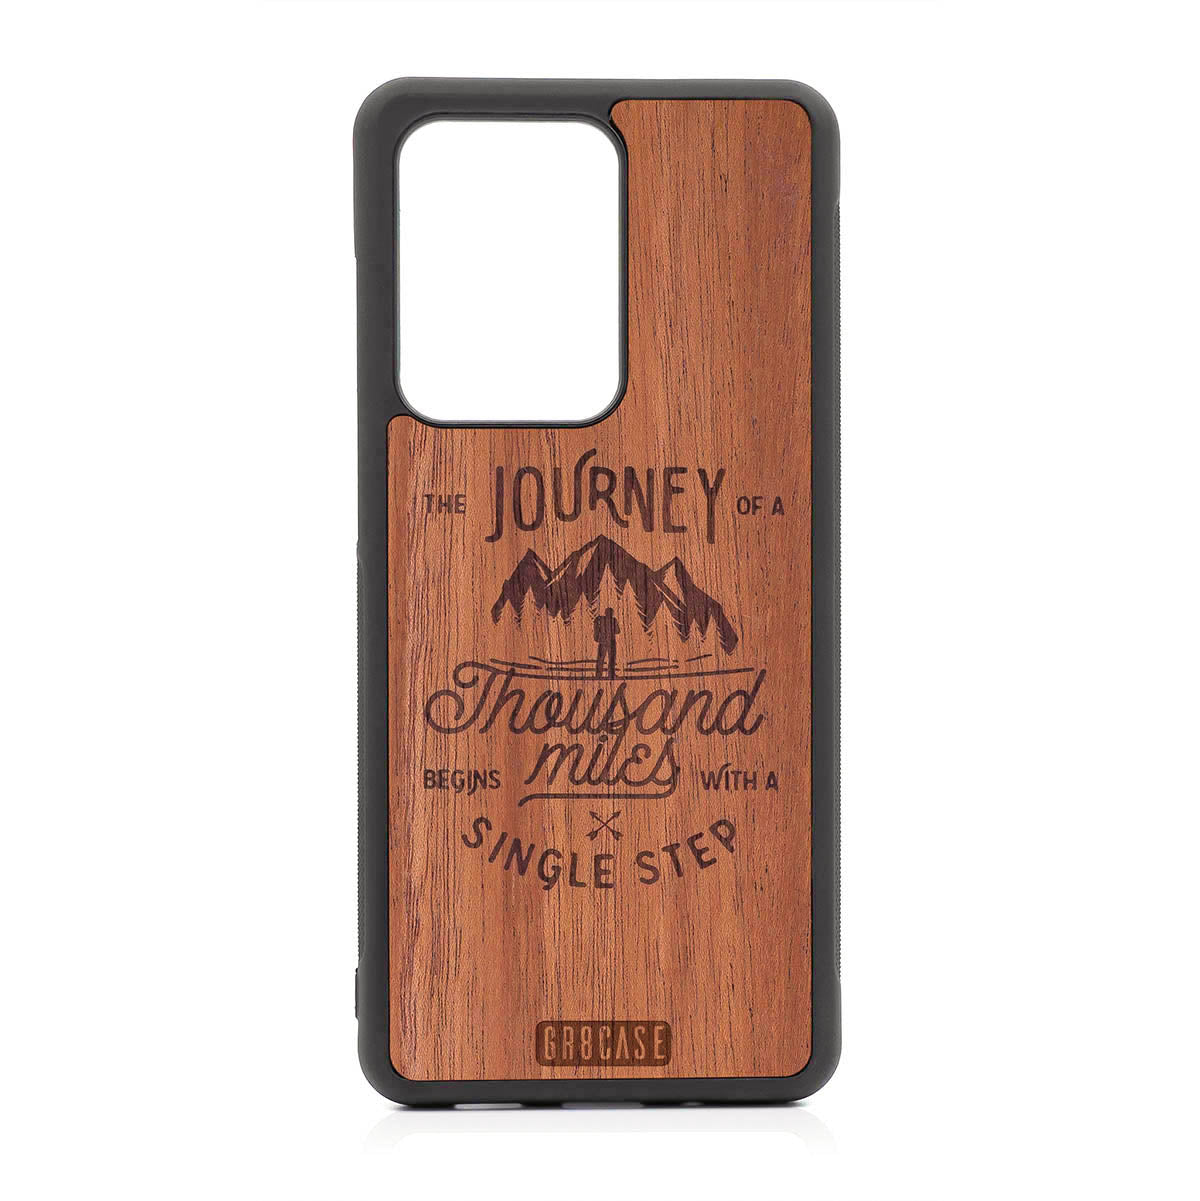 The Journey Of A Thousand Miles Begins With A Single Step Design Wood Case For Samsung Galaxy S20 Ultra